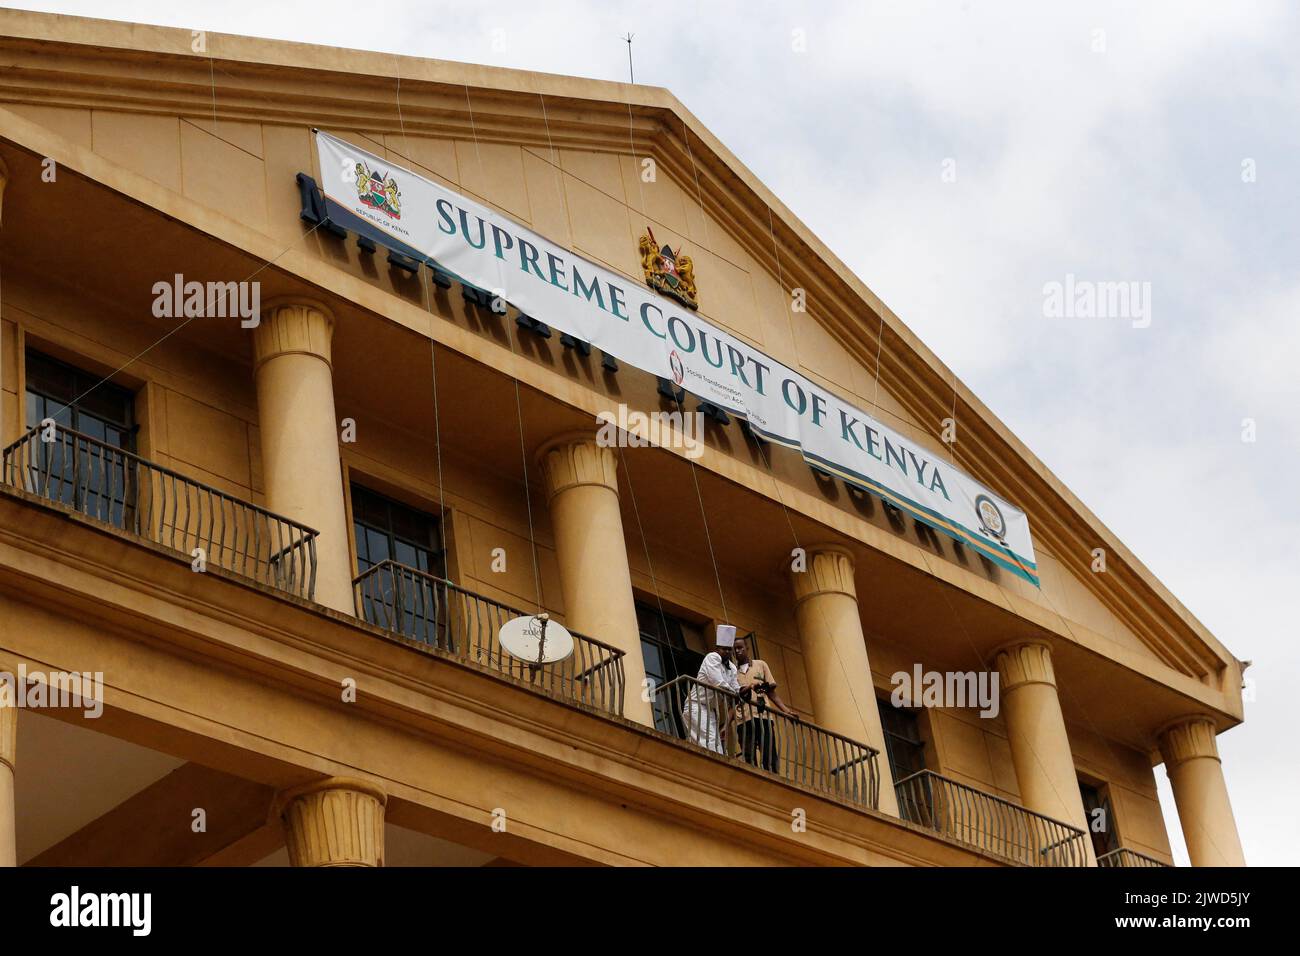 A general view of the Supreme Court building after the Supreme Court upheld Kenyan President-elect William Ruto's presidential election victory, at the Supreme Court in Nairobi, Kenya September 5, 2022. REUTERS/Thomas Mukoya Stock Photo